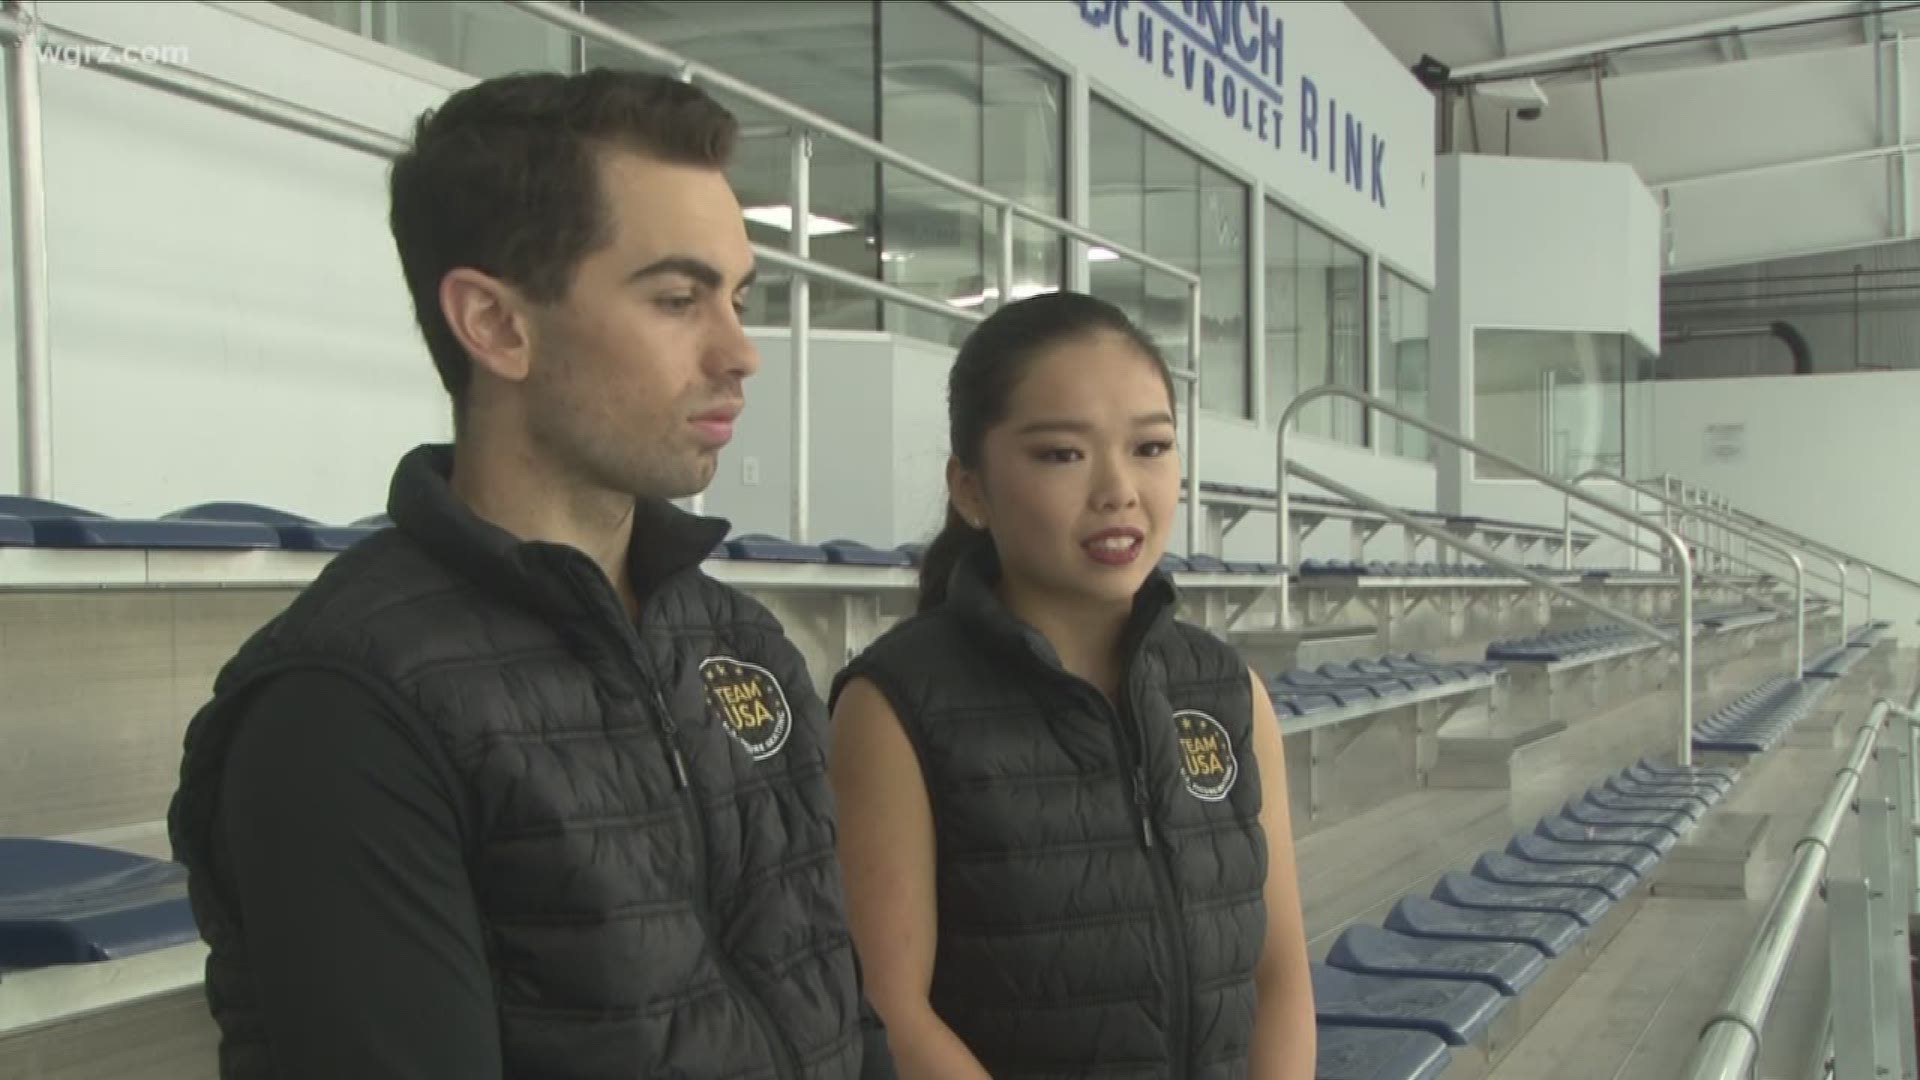 Local Ice Dance Champs Find Global Spotlight